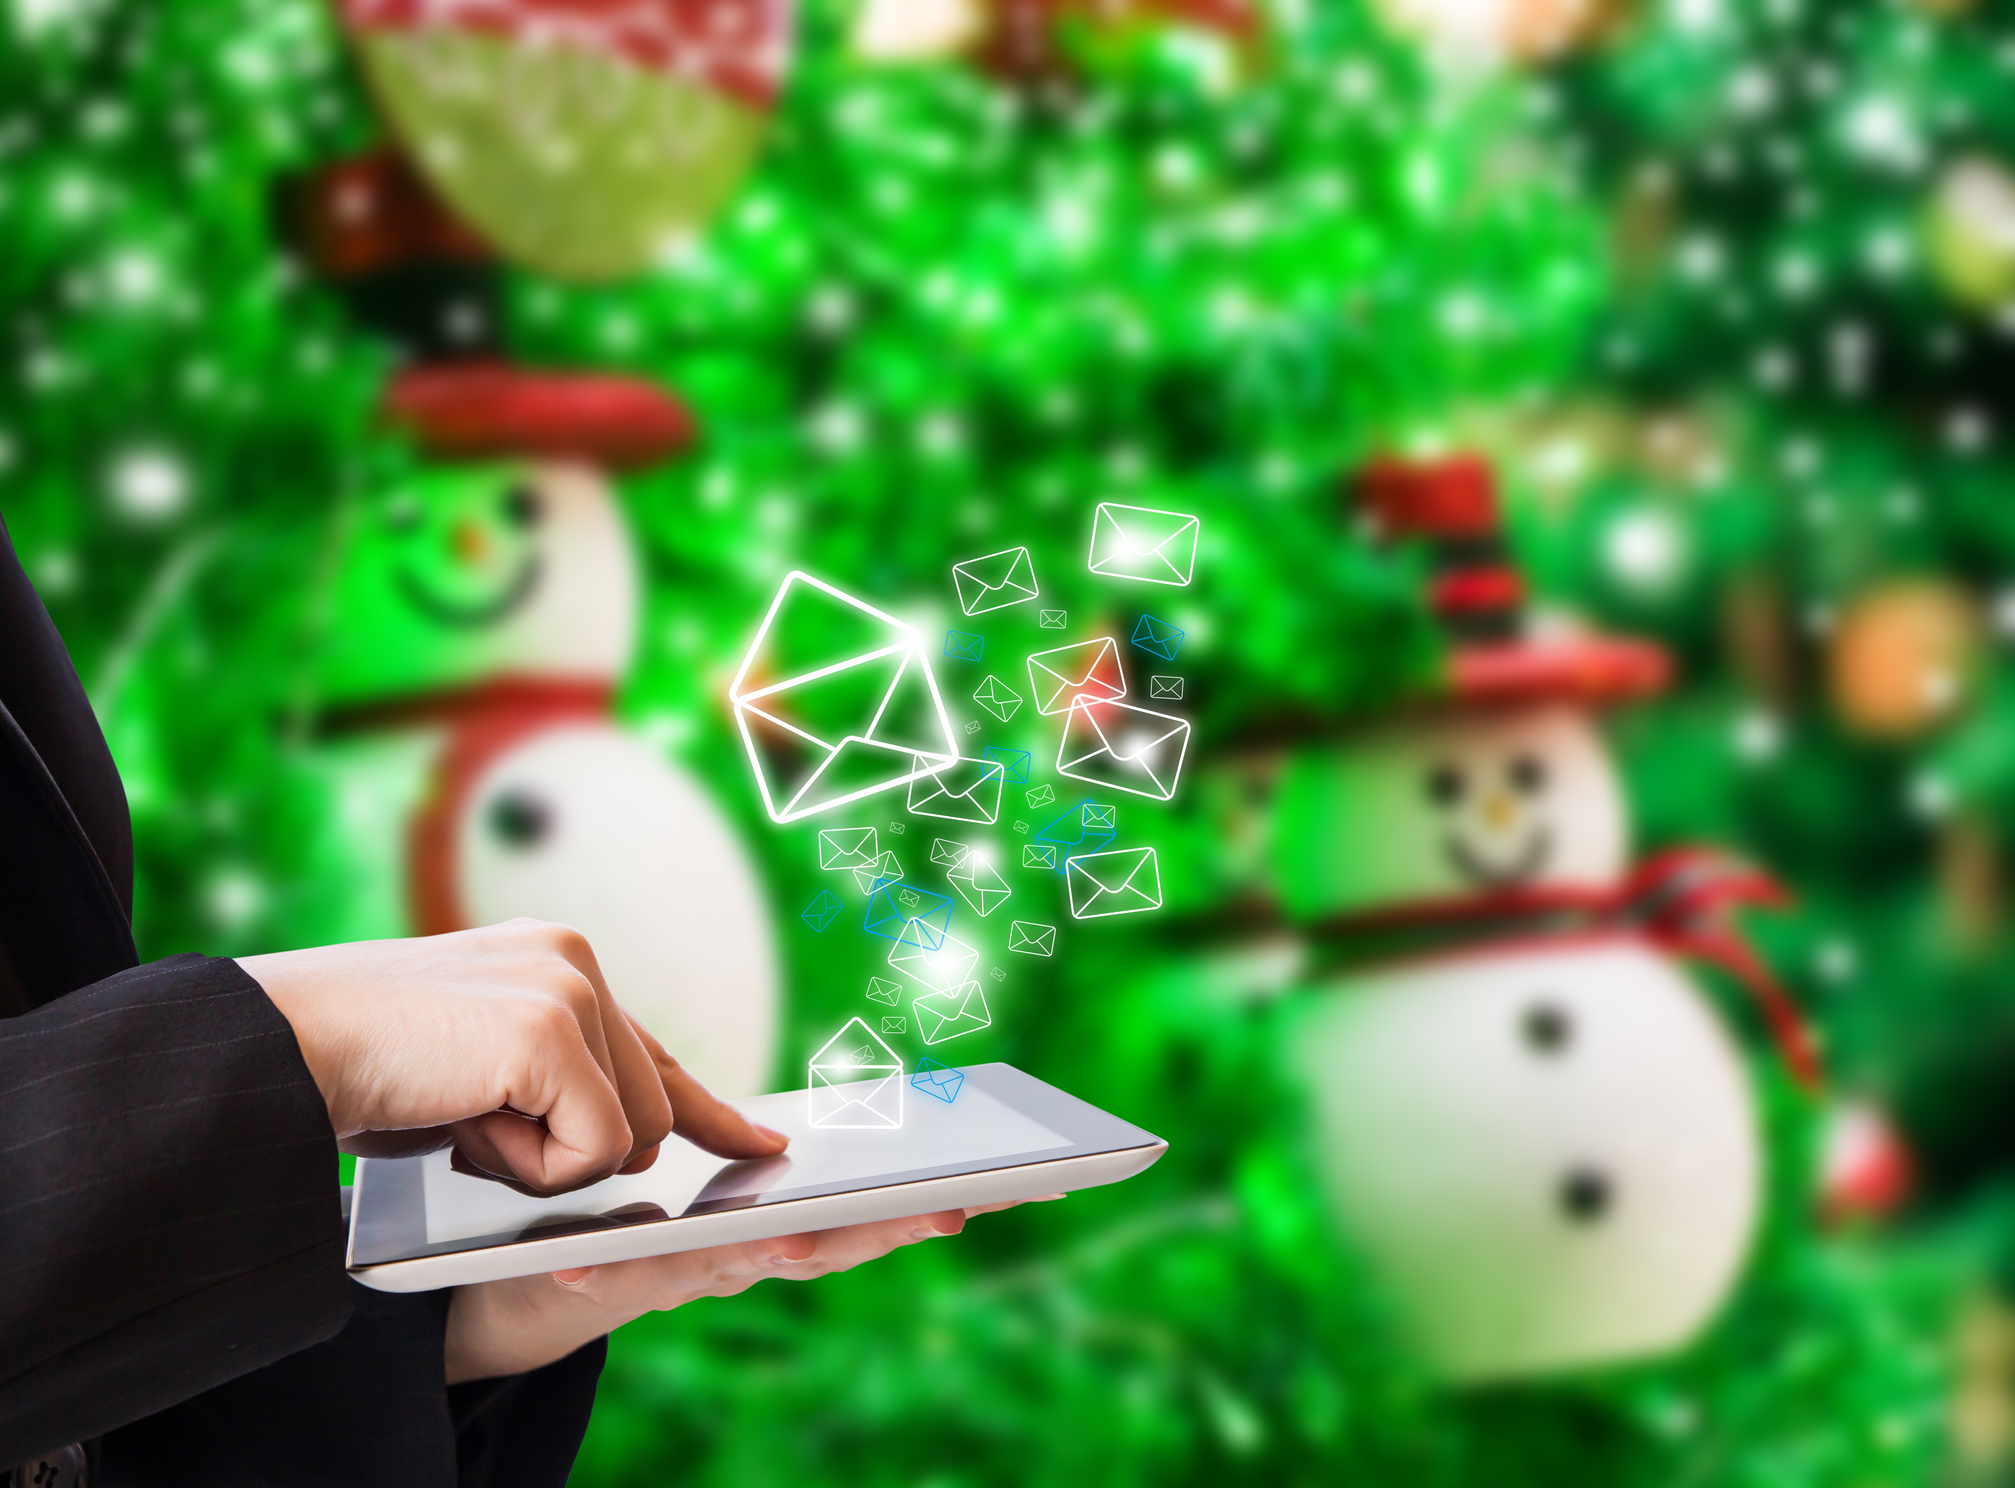 Composite image of person using tablet and Christmas tree background